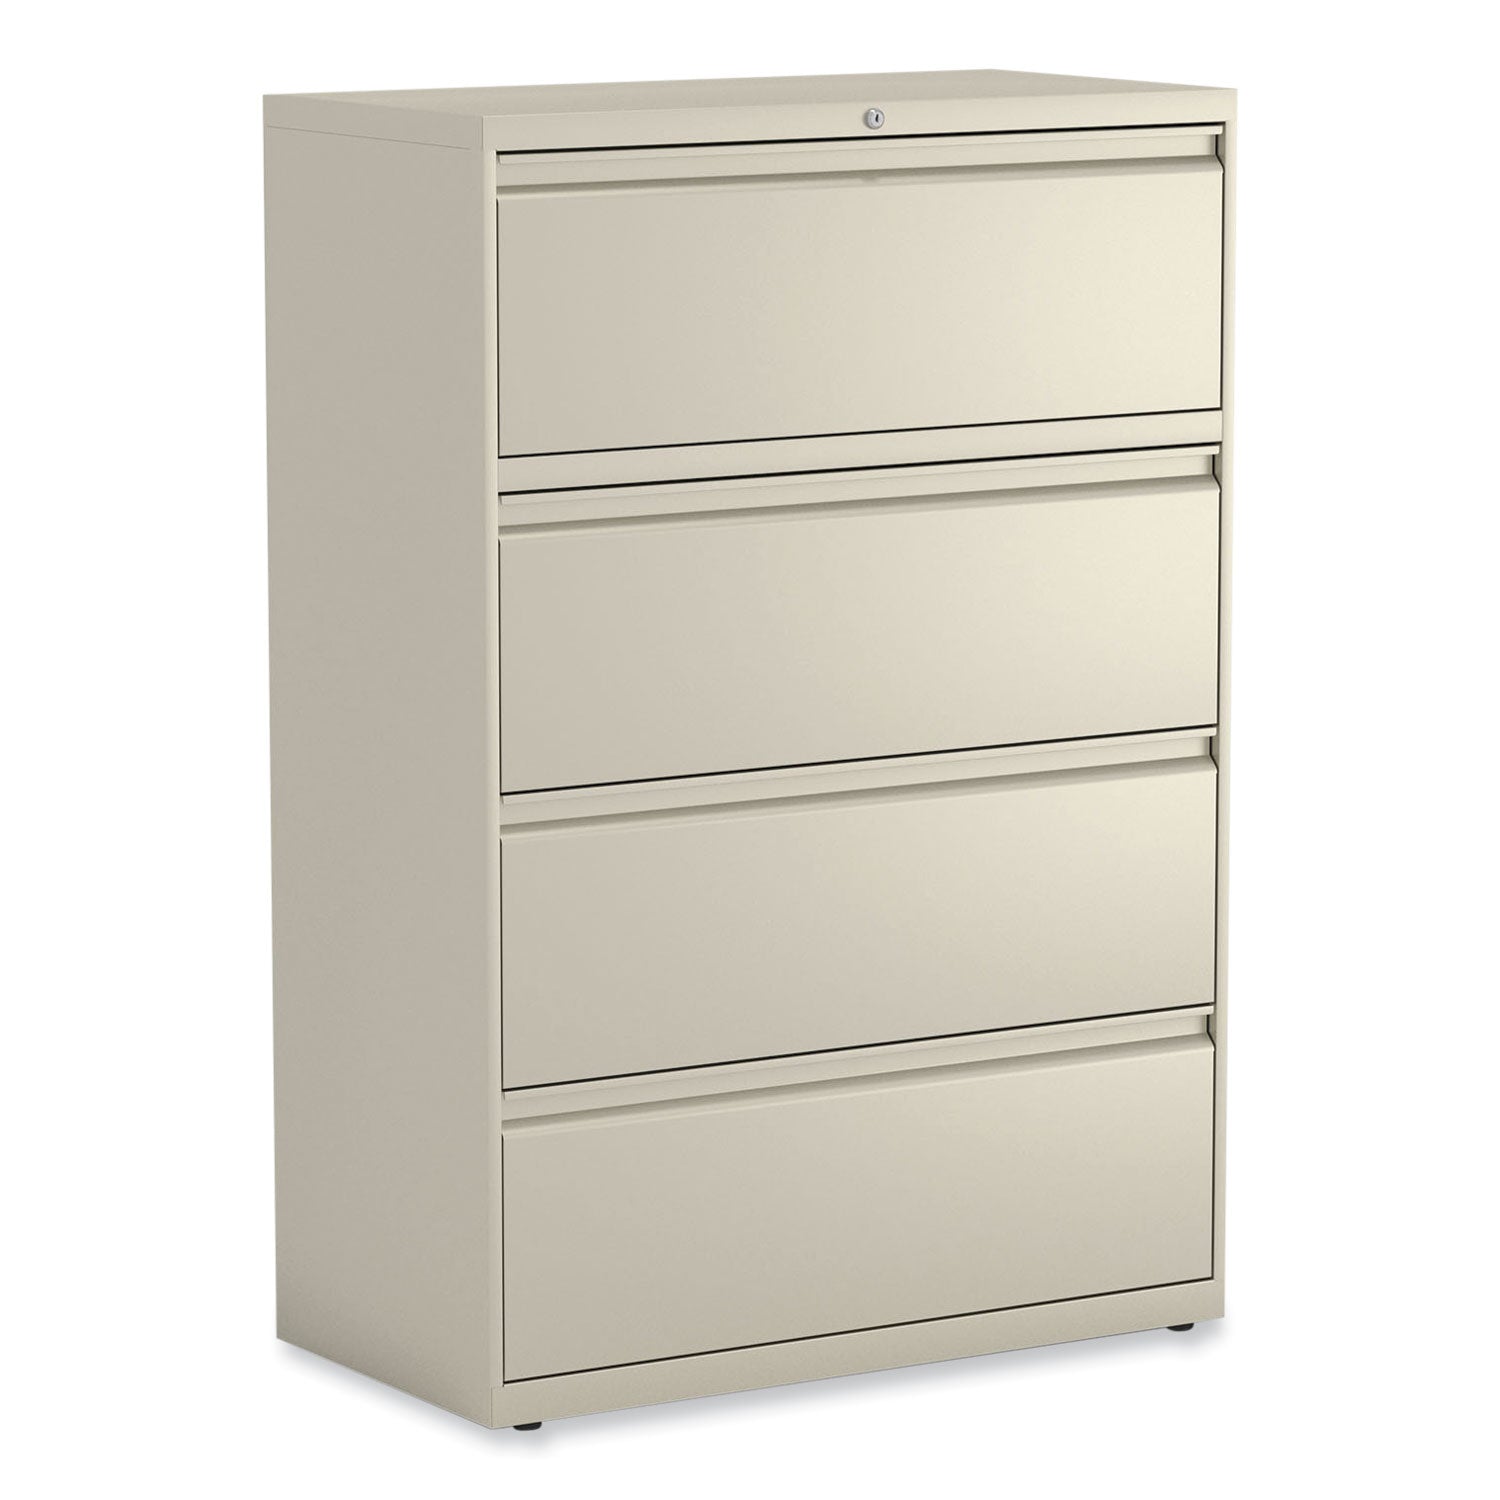 lateral-file-4-legal-letter-size-file-drawers-putty-36-x-1863-x-525_alehlf3654py - 1